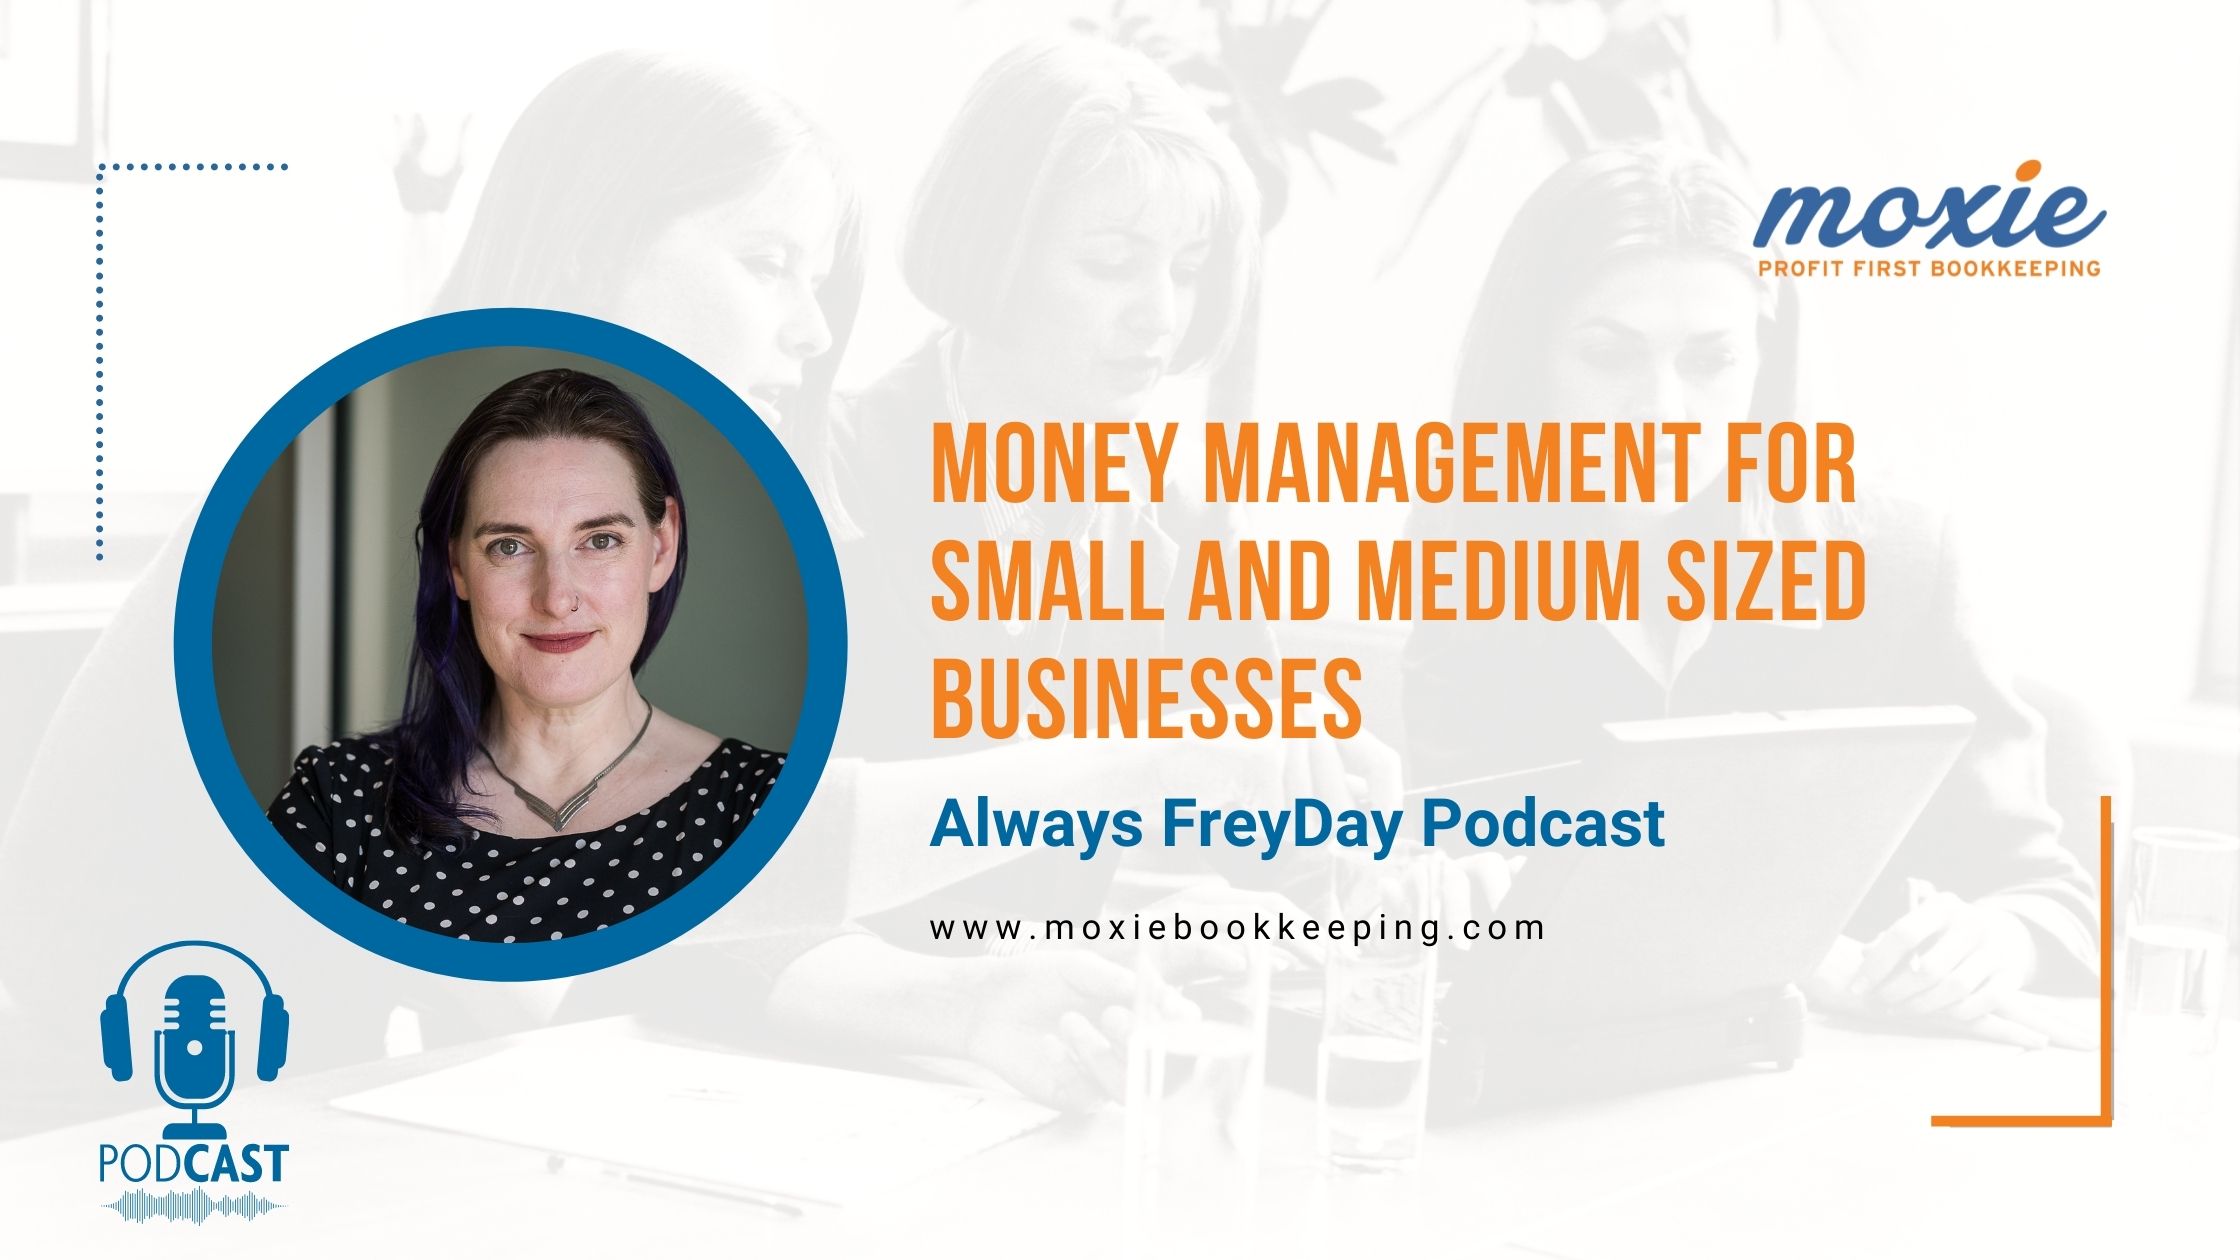 always freyday podcst interview with ean price murphy of moxie bookkeeping all about financial management for small and medium sized businesses